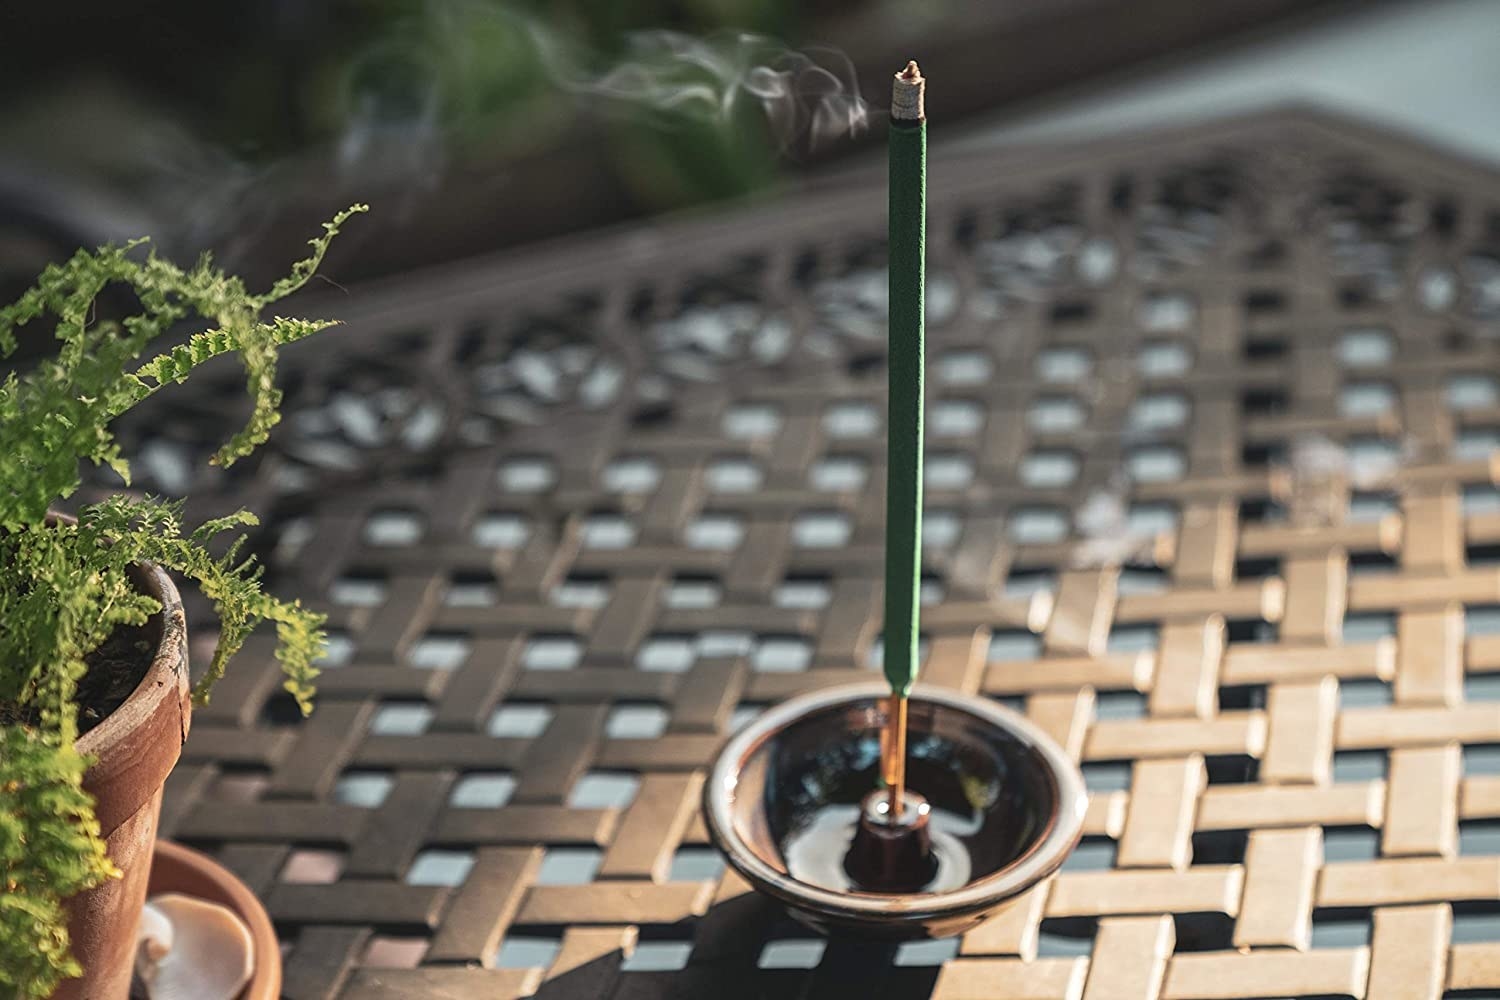 incense stick burning in a holder on a patio table